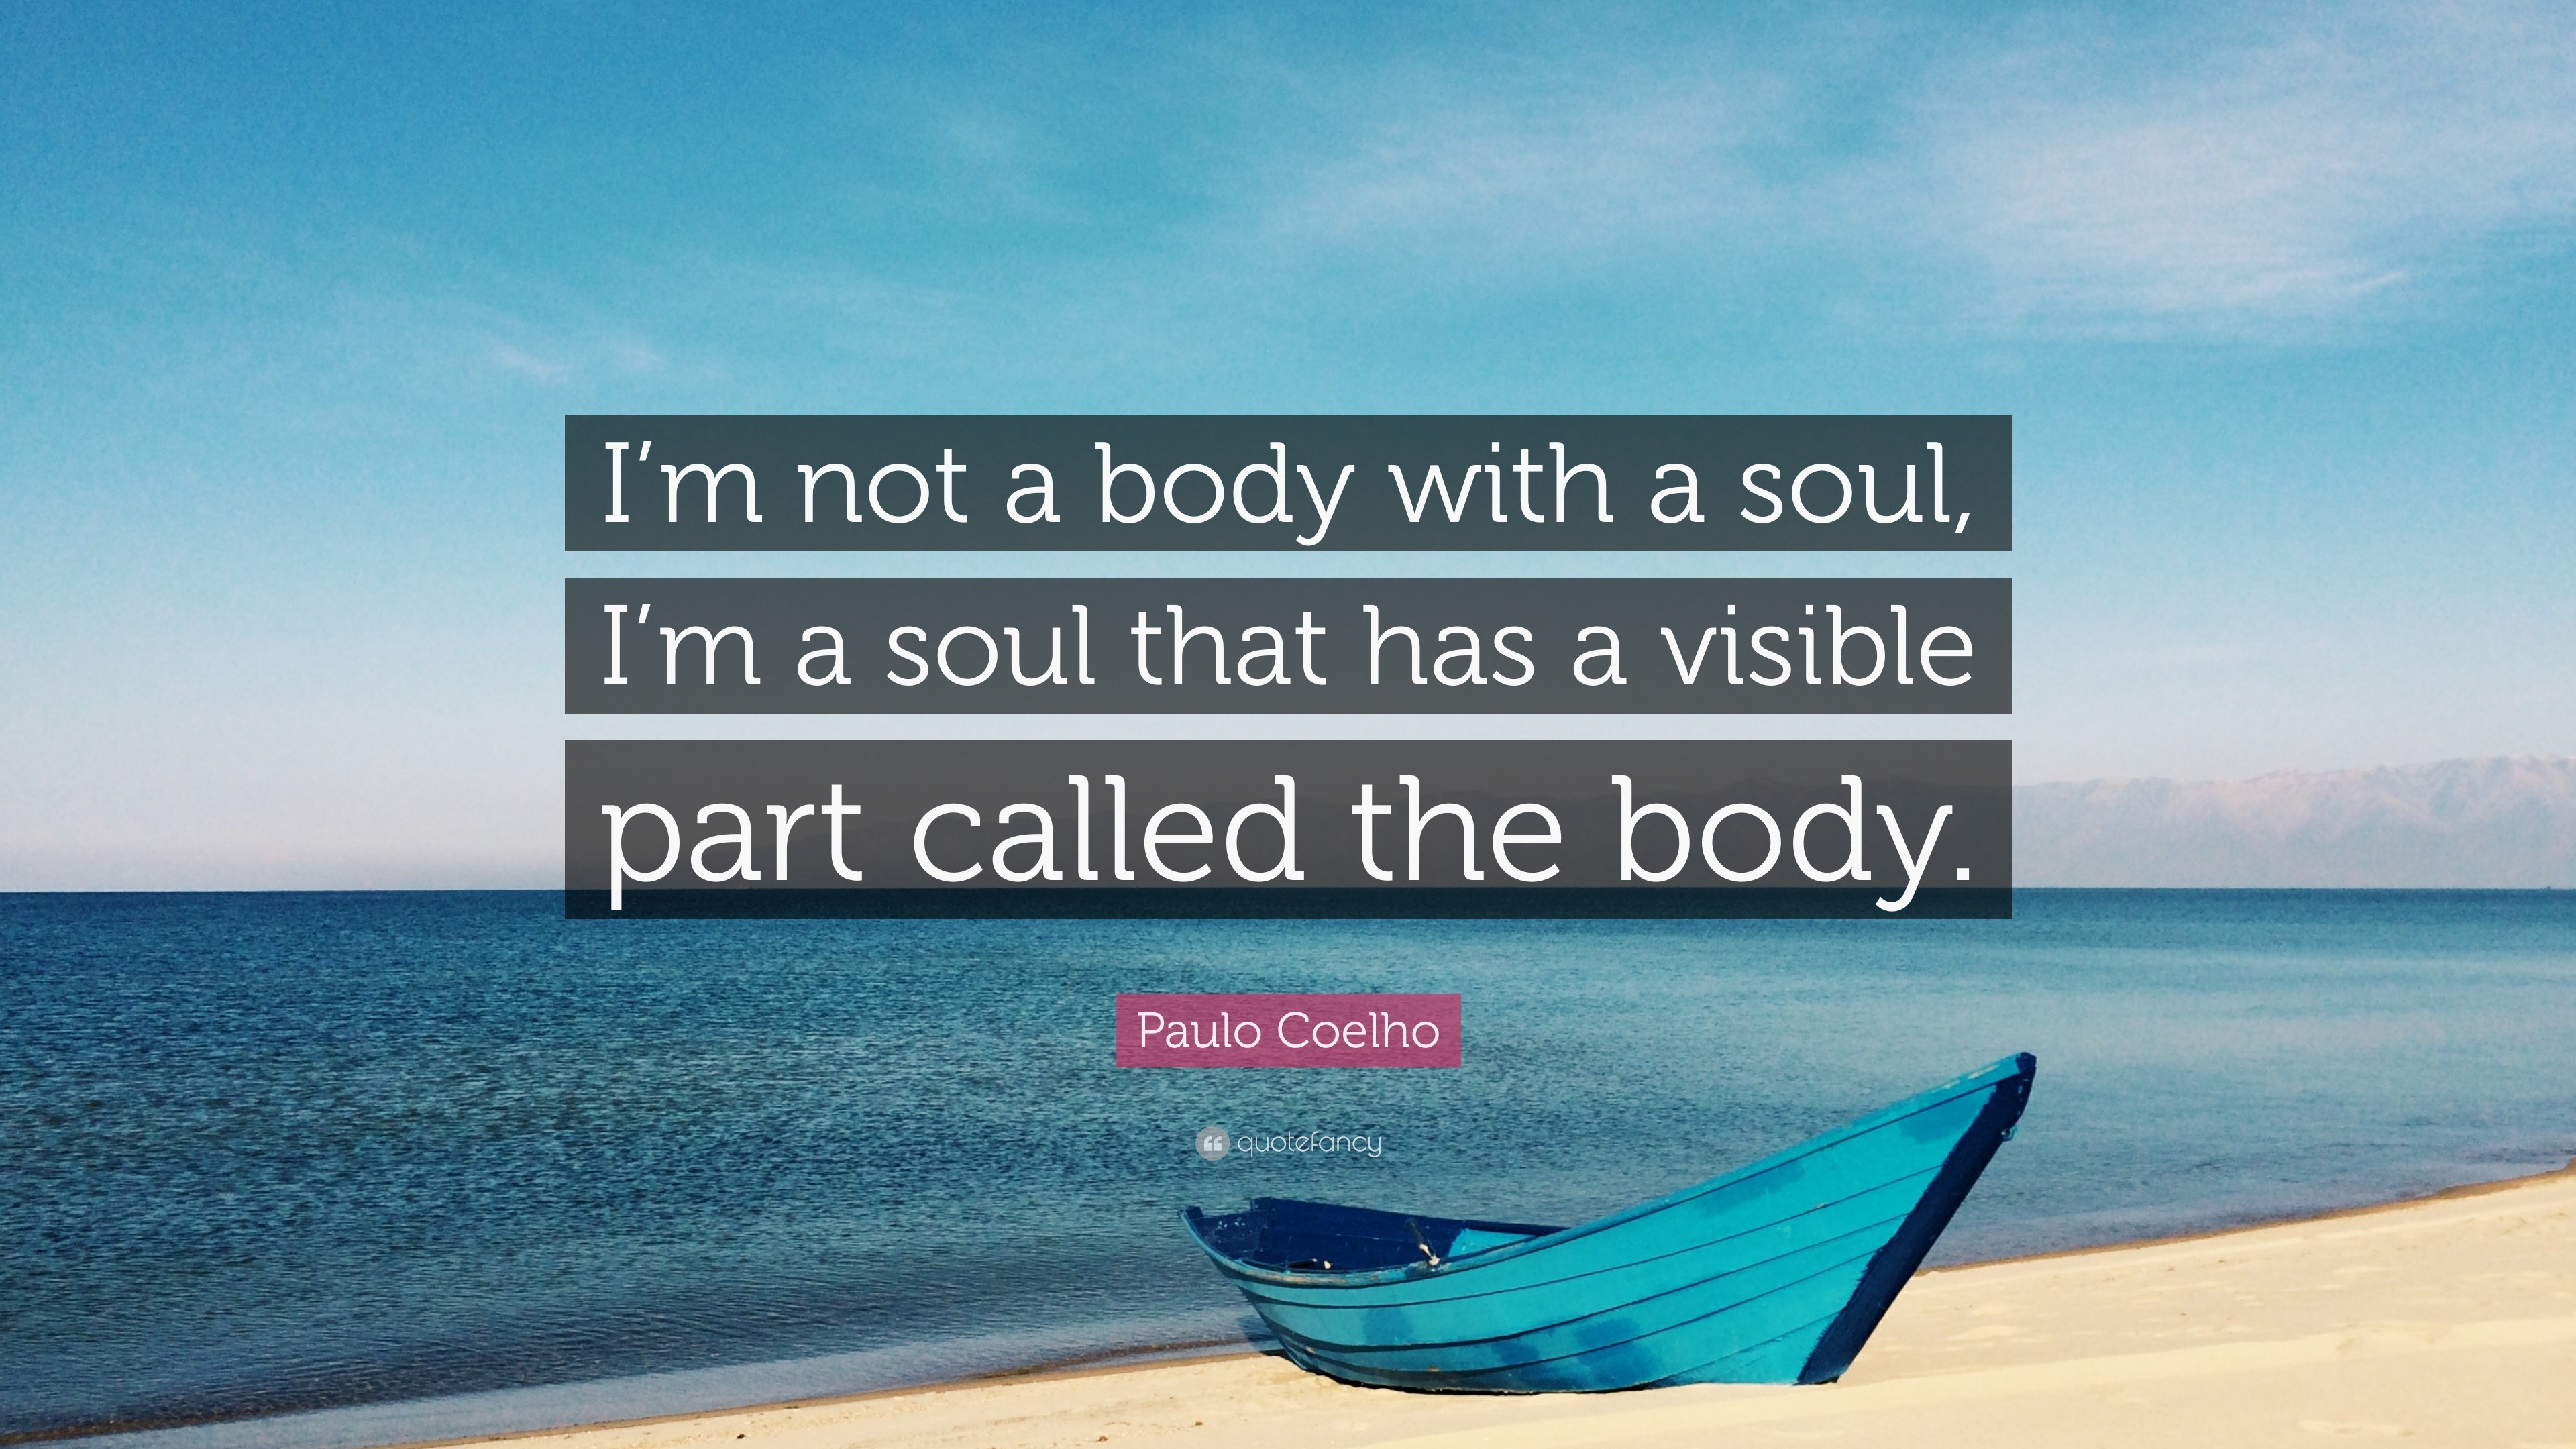 Image result for “I’m not a body with a soul, I’m a soul that has a visible part called the body.”